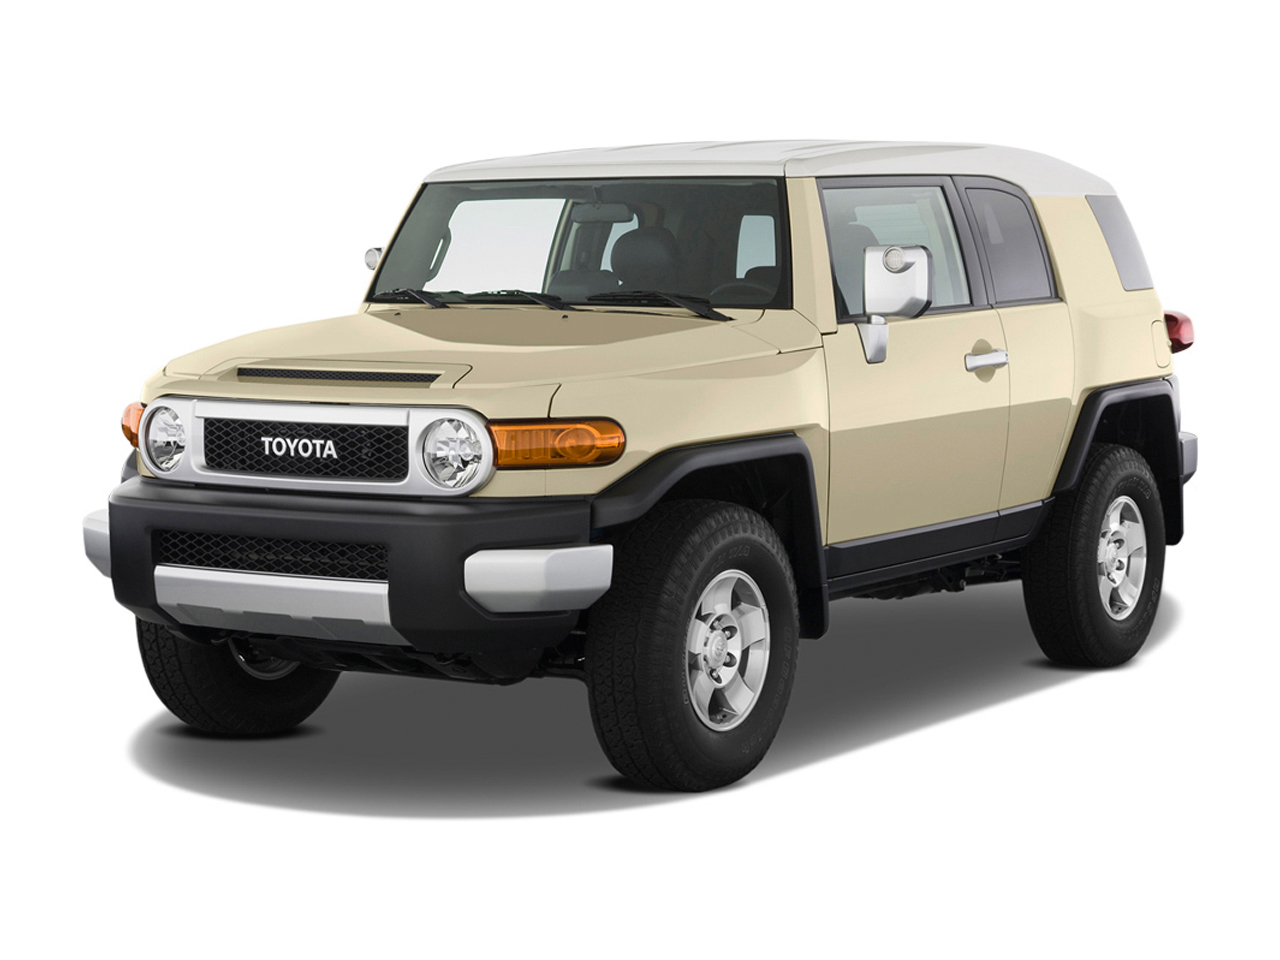 2011 Toyota Fj Cruiser Review Ratings Specs Prices And Photos